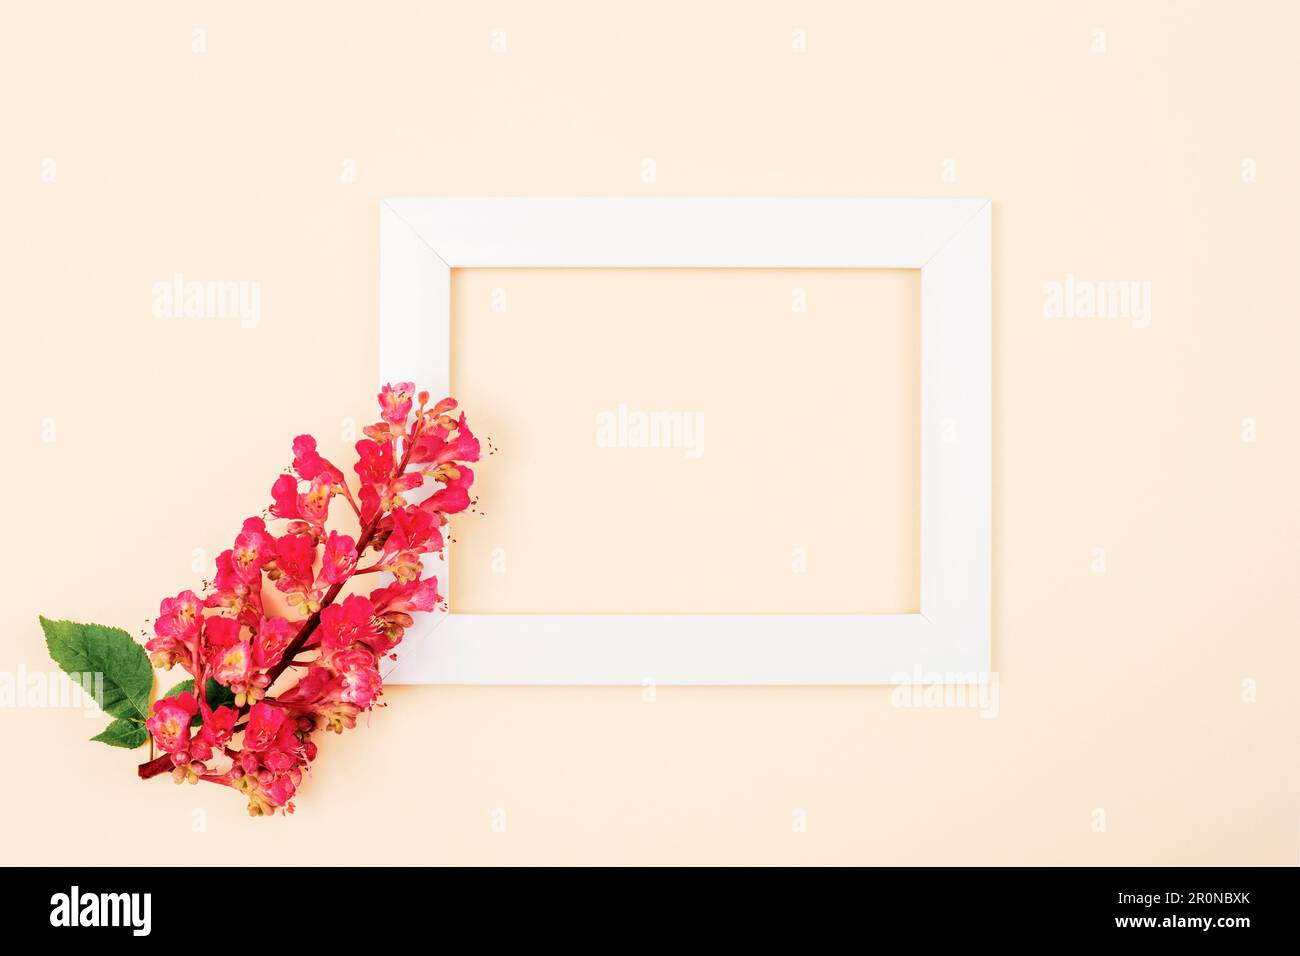 Blank picture frame and Aesculus Carnea flower on neutral background. Holiday concept. Top view, flat lay, mockup. Stock Photo